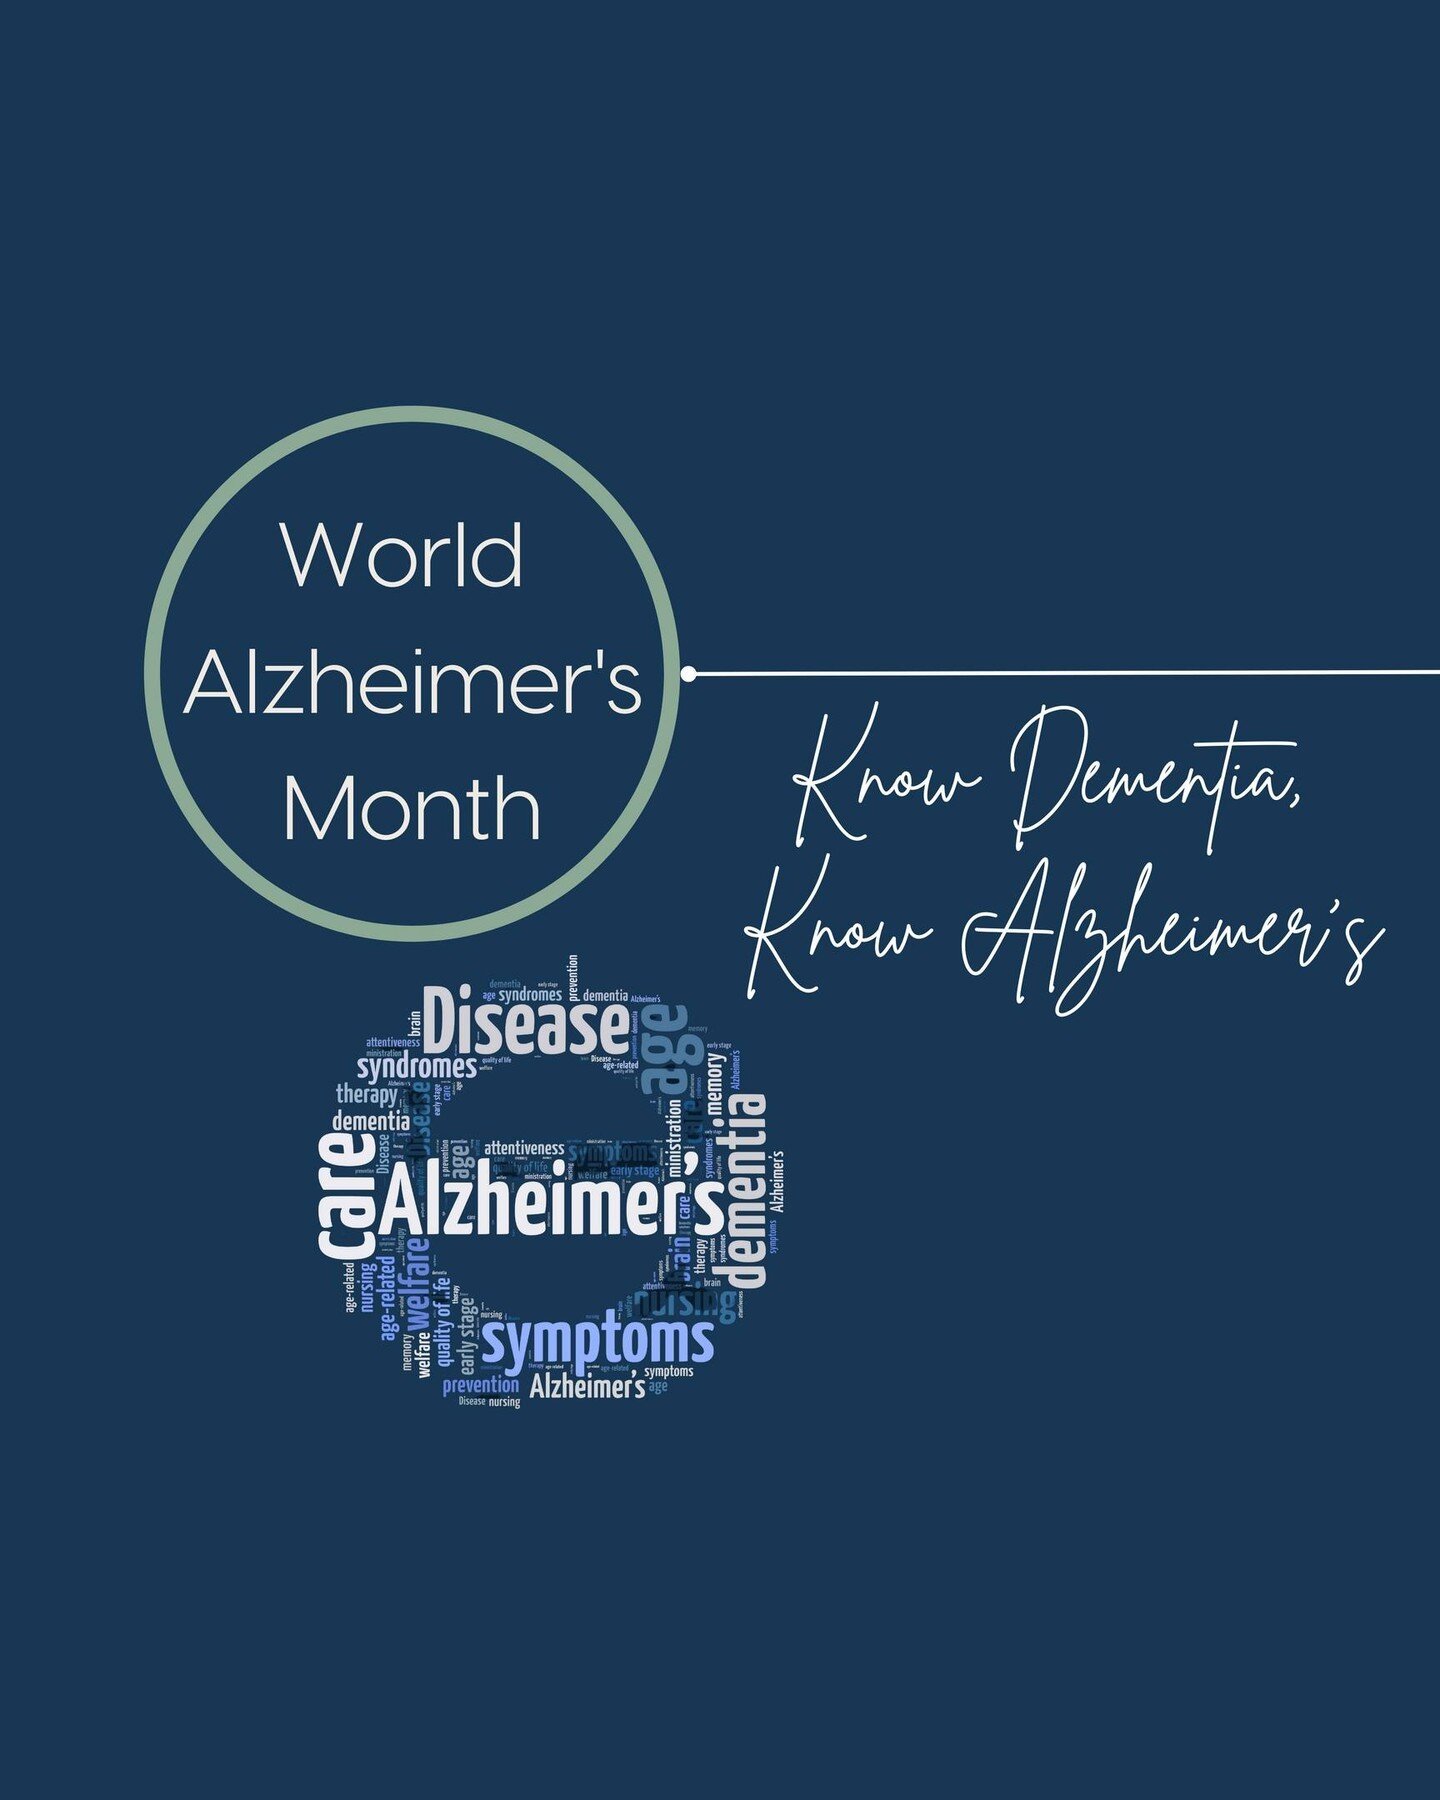 September is World Alzheimer's Month, and this year's theme is &quot;Know Dementia, Know Alzheimer's.&quot;⁠
⁠
It's a good idea to take the time to learn more about the disease that affects so many people in our lives&mdash;and it's not just because 